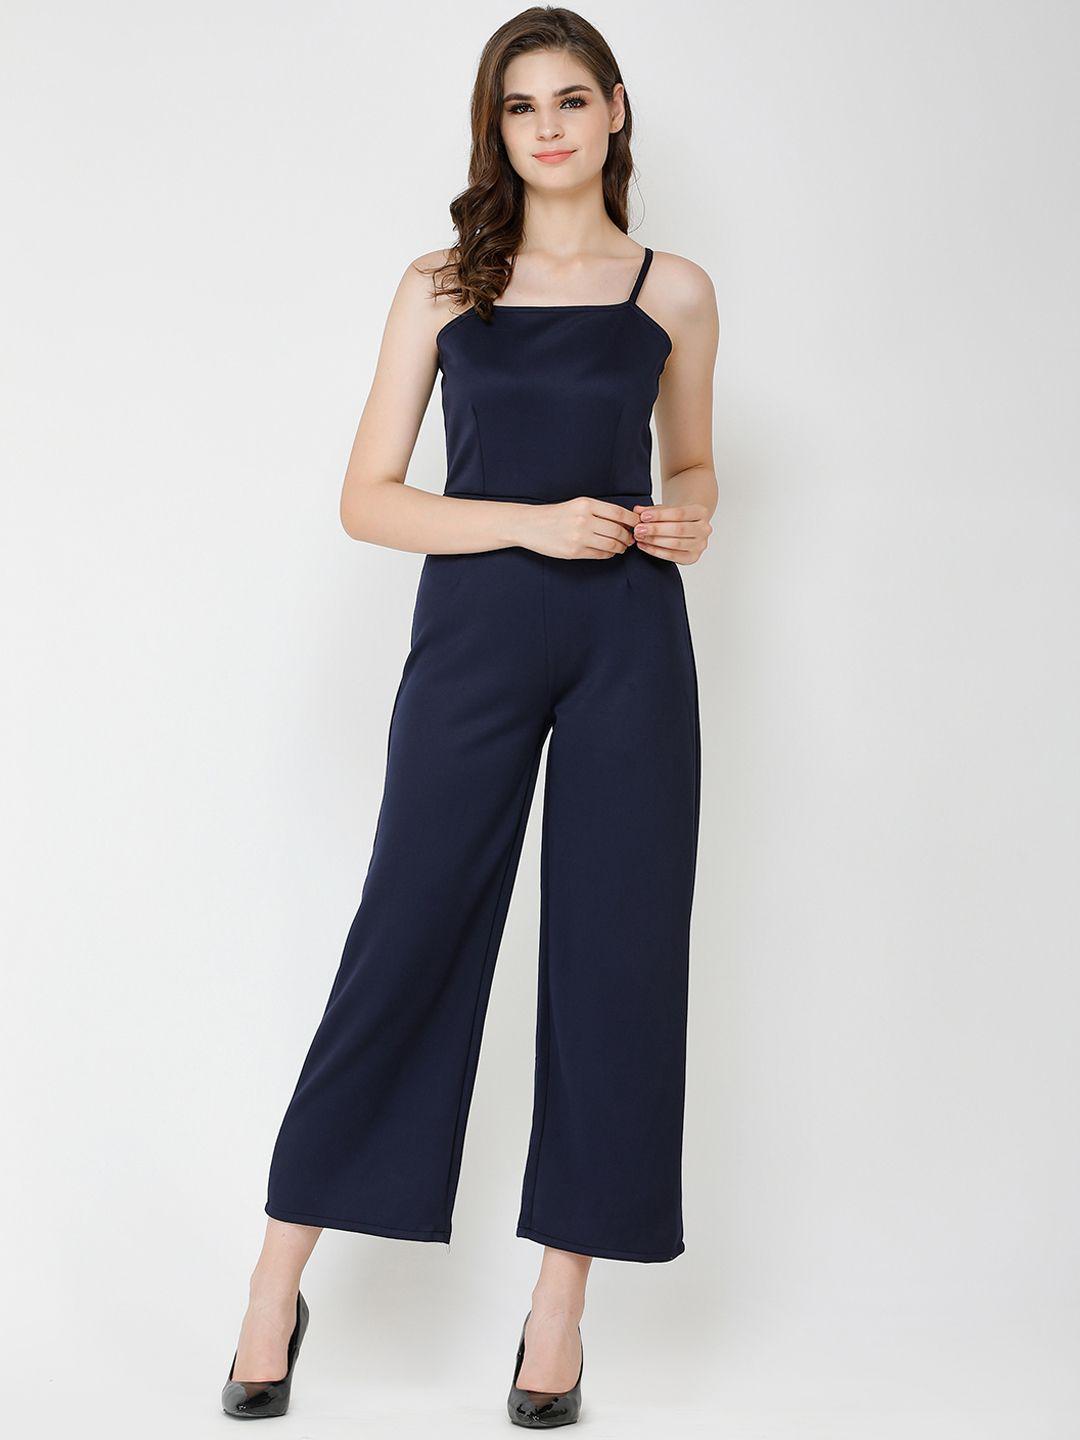 cation-women-navy-blue-solid-basic-jumpsuit